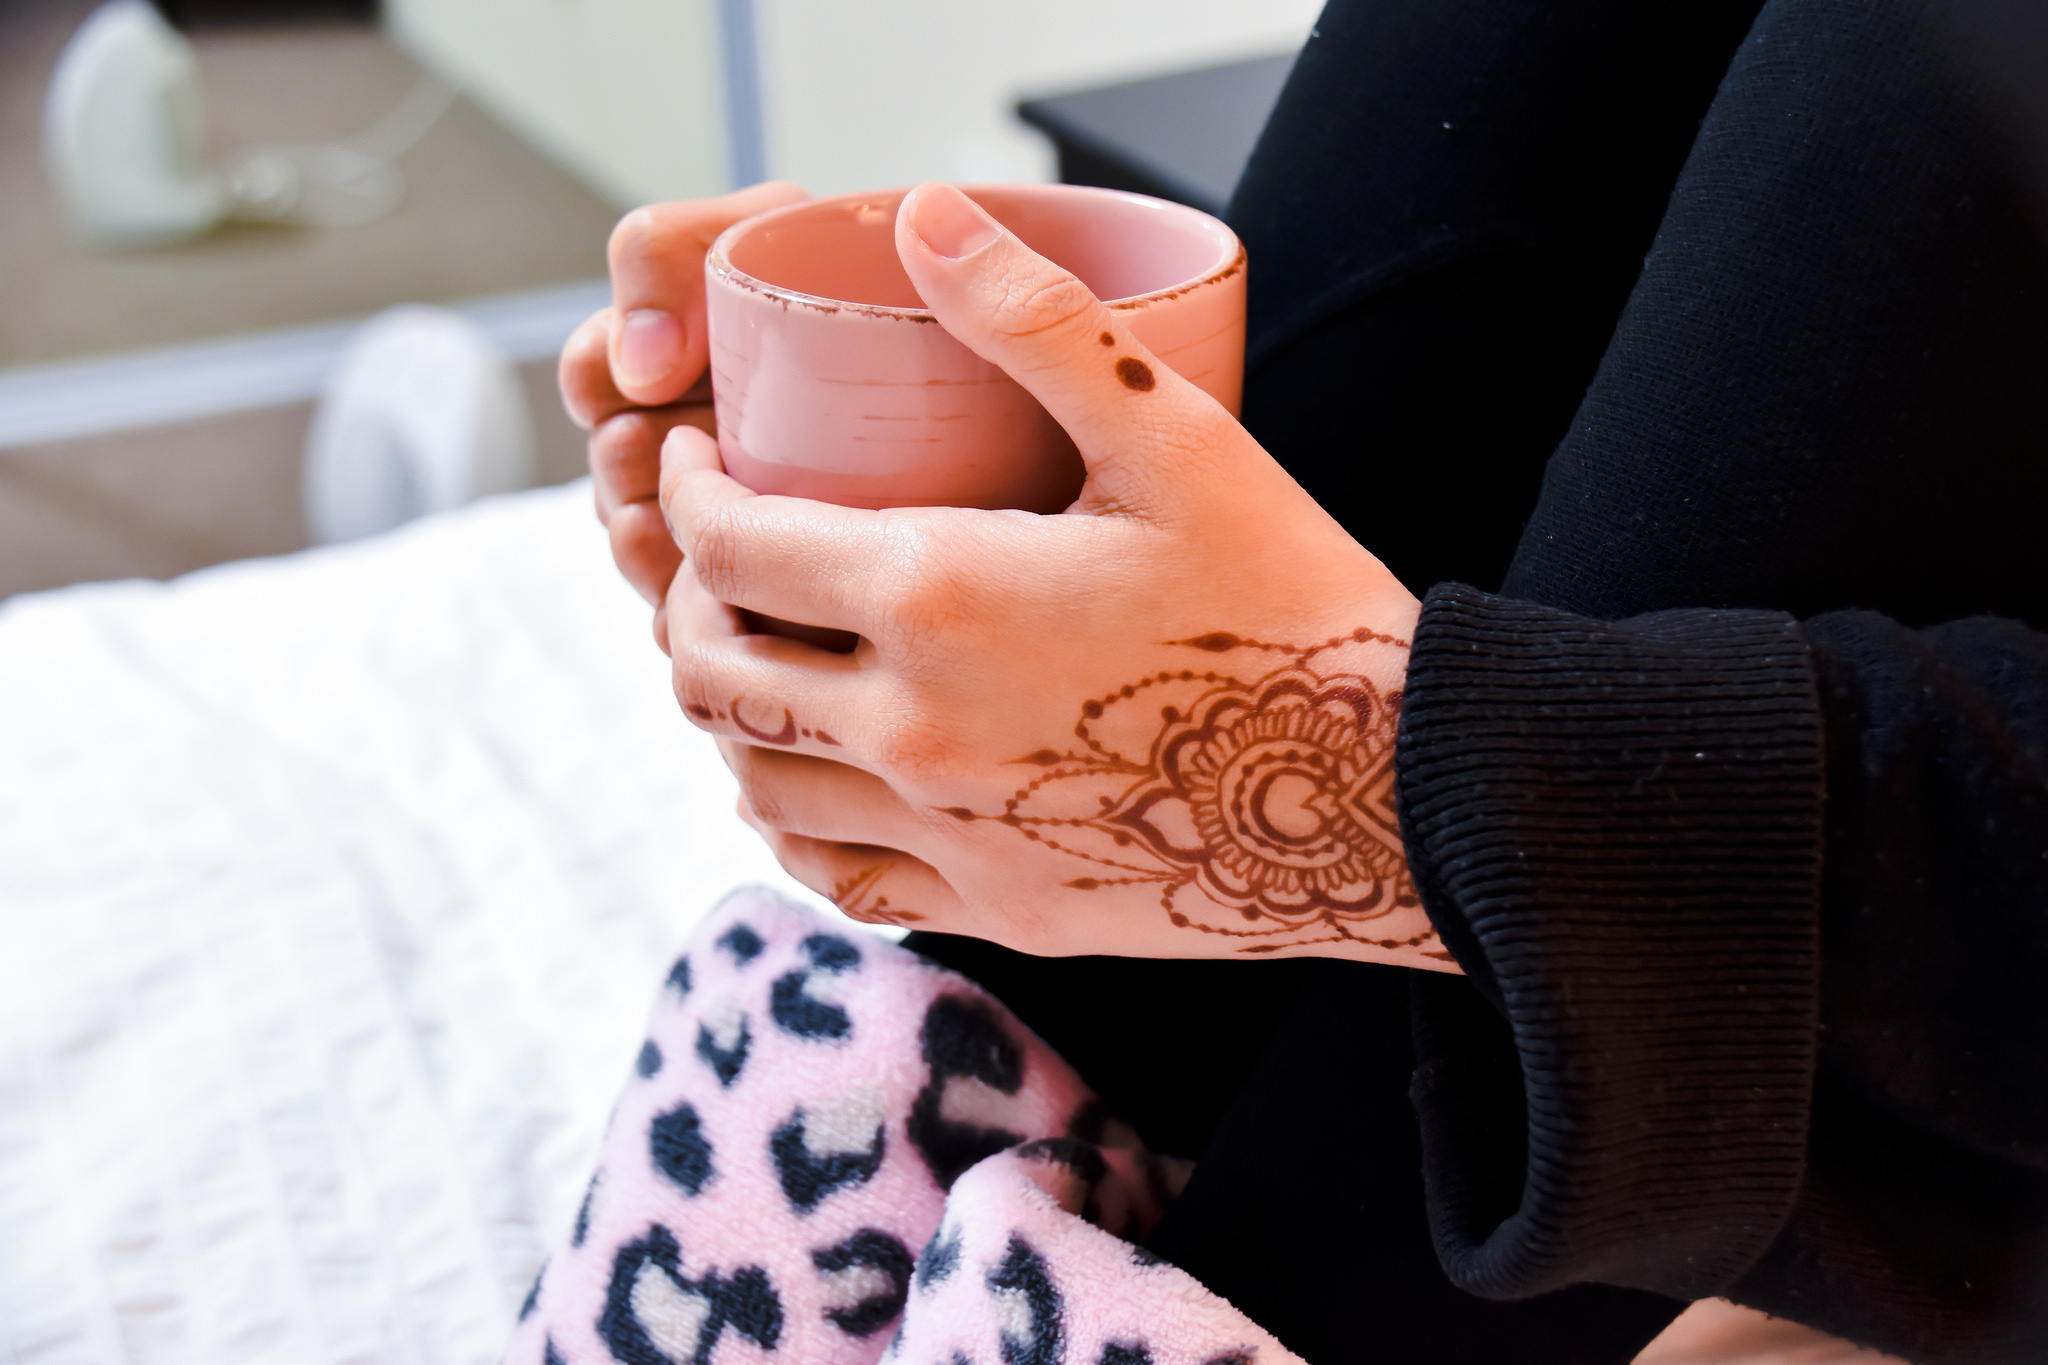 How to take care of your jagua tattoo Jagua tattoo stain progression  Instagram paisleysandswirls Henna in Houston Paisleysandswi  Henna  tattoo Tattoos Henna